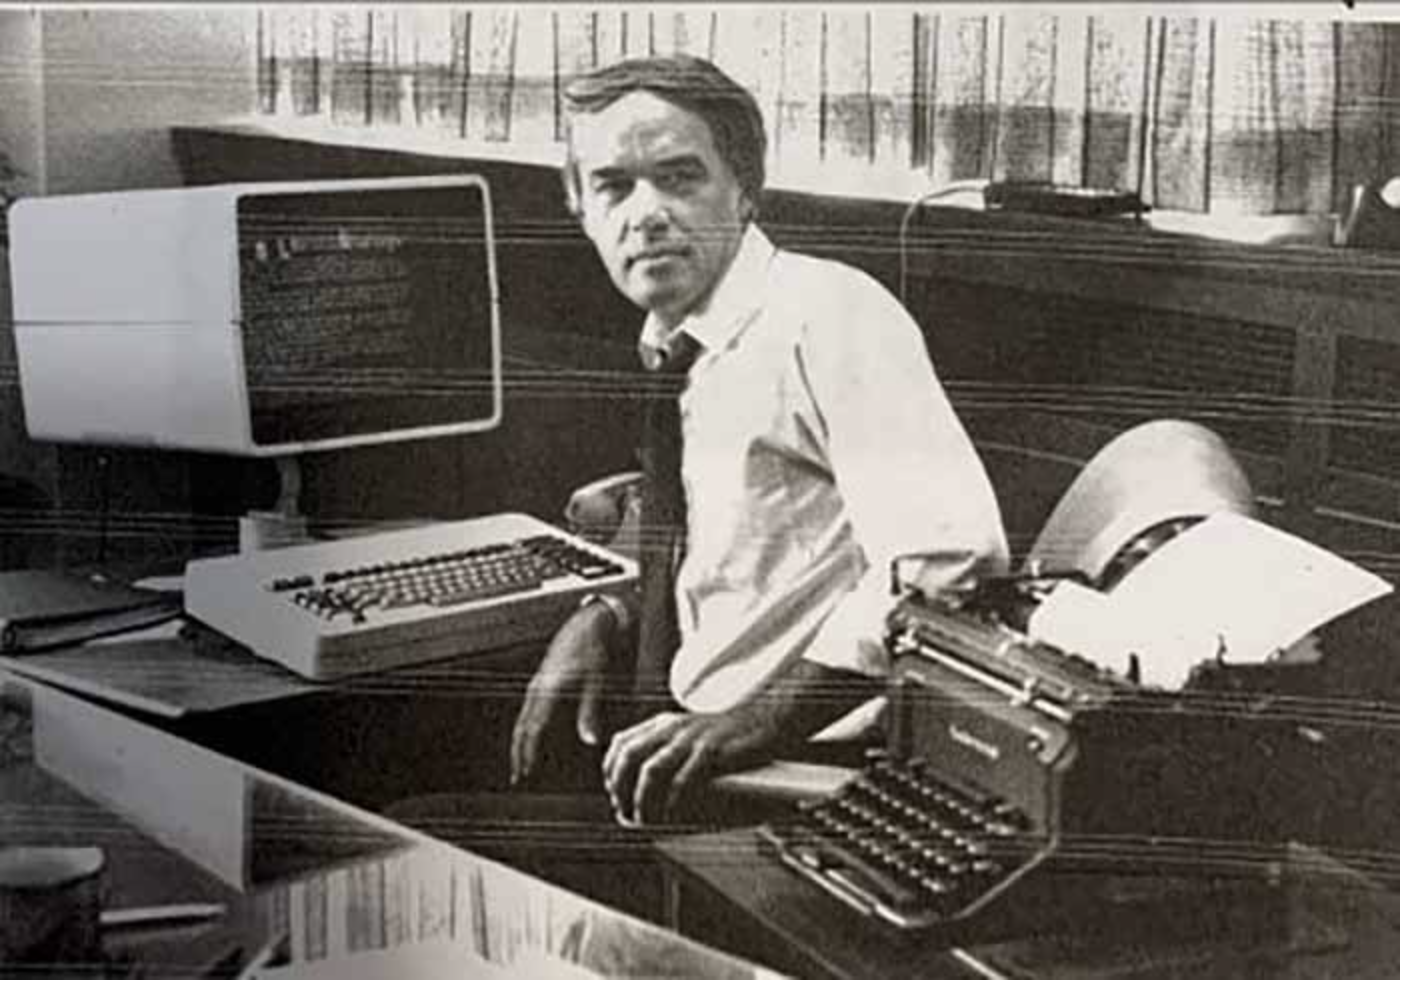 Buzz Merritt pictured at his desk with two generations of newspaper technologies